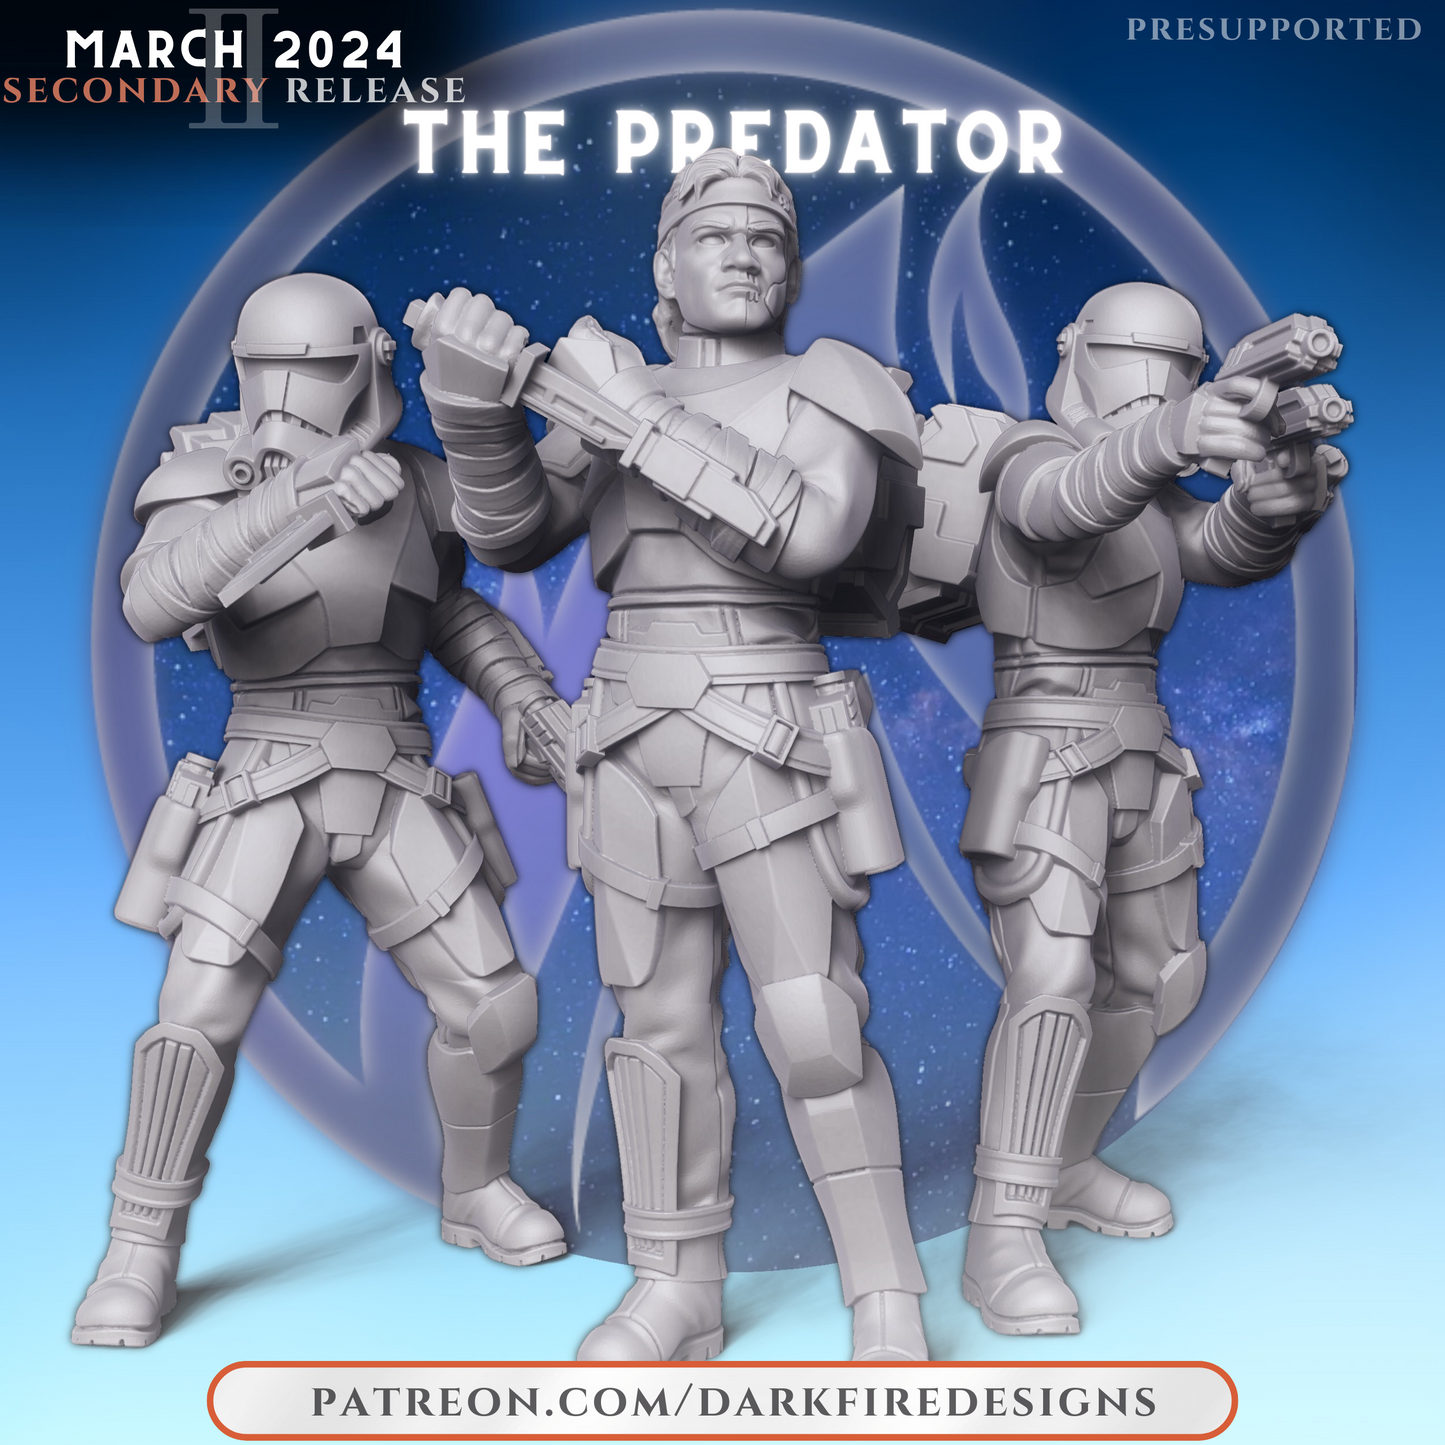 March 2024 Secondary Patreon.com Release